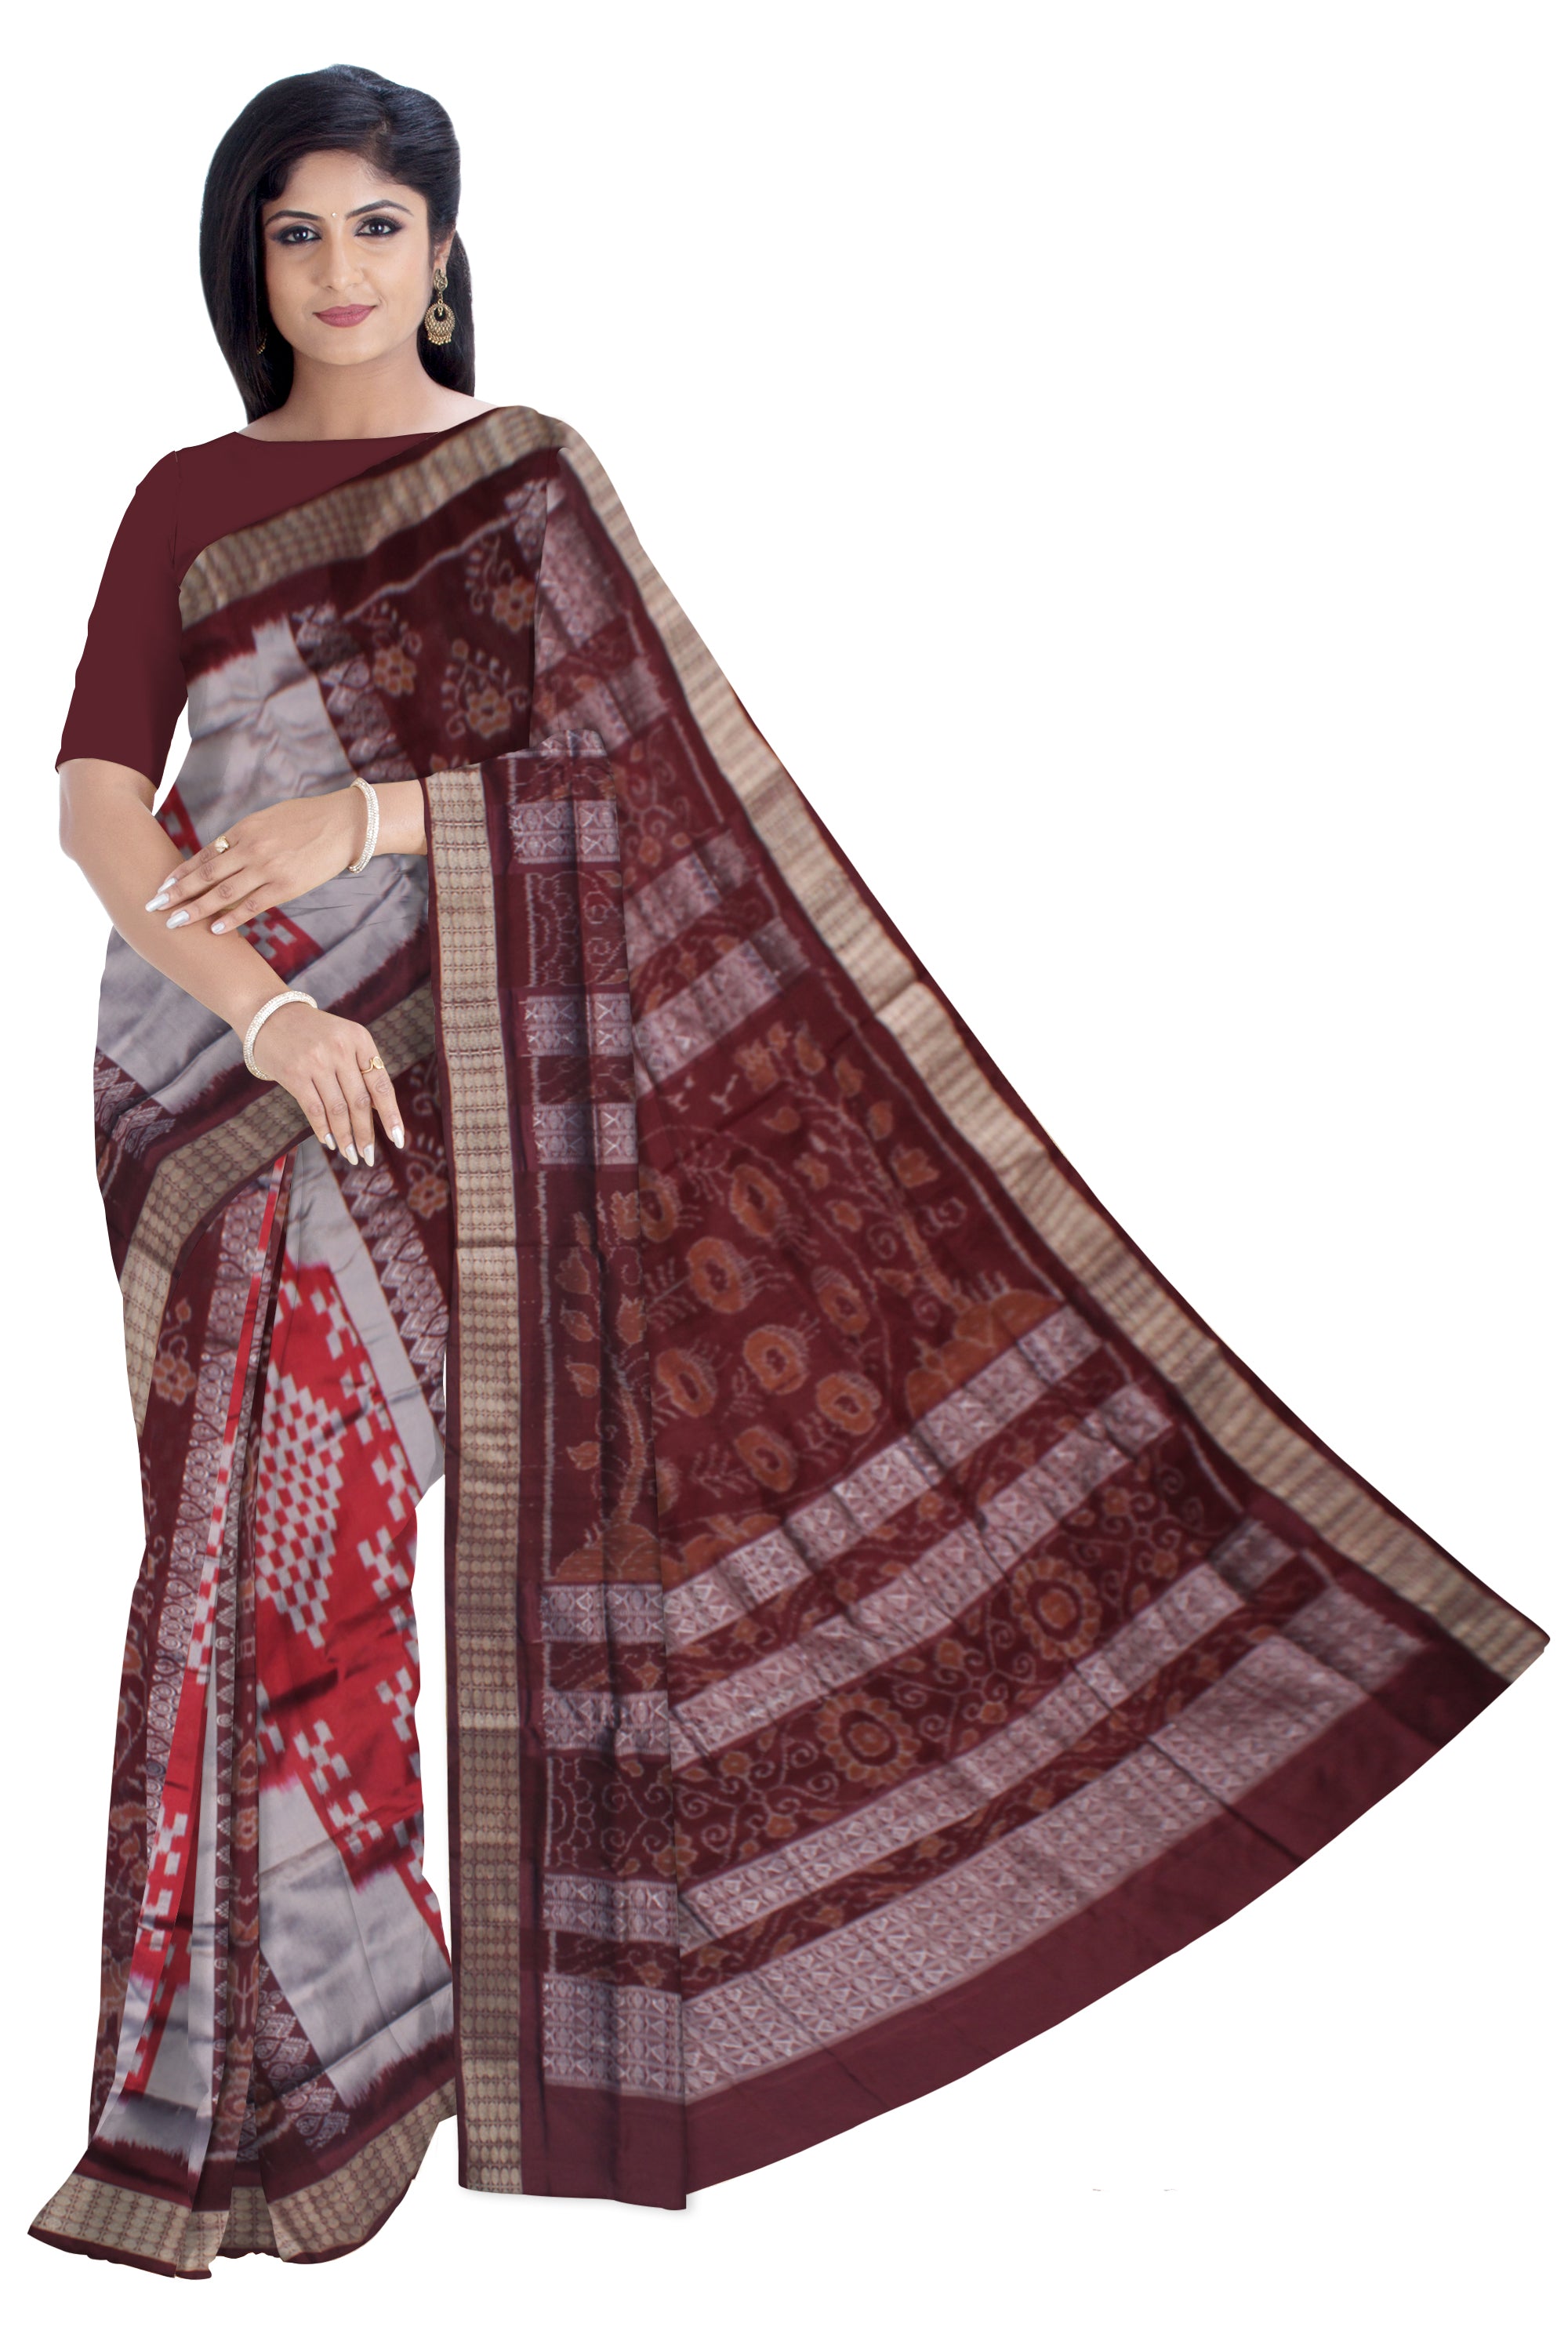 SAPTA WITH BANDHA PATTERN BOMKEI PATA SAREE IS SILVER, RED AND COFFEE COLOR. WITH MATCHING BLOUSE PIECE. - Koshali Arts & Crafts Enterprise